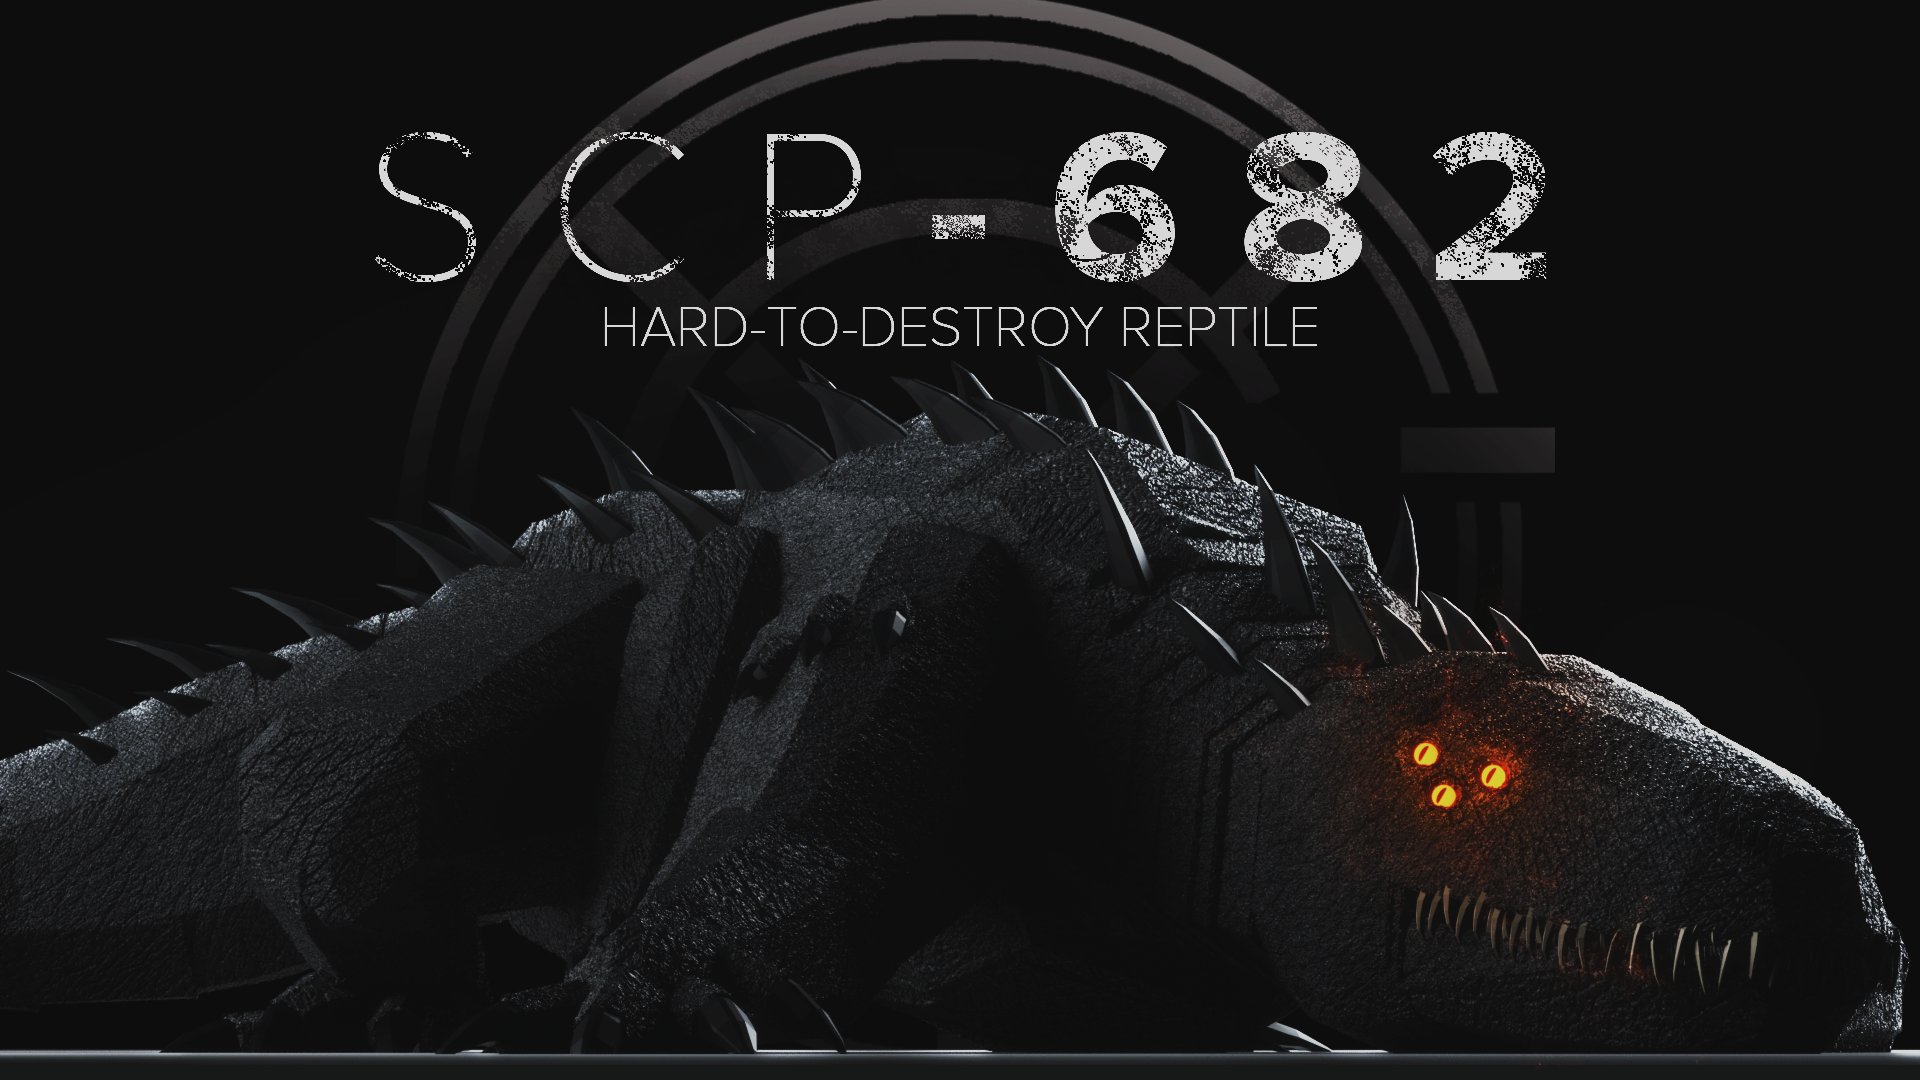 SCP-682 is going to hunt you down for 24 hours, but you can get to